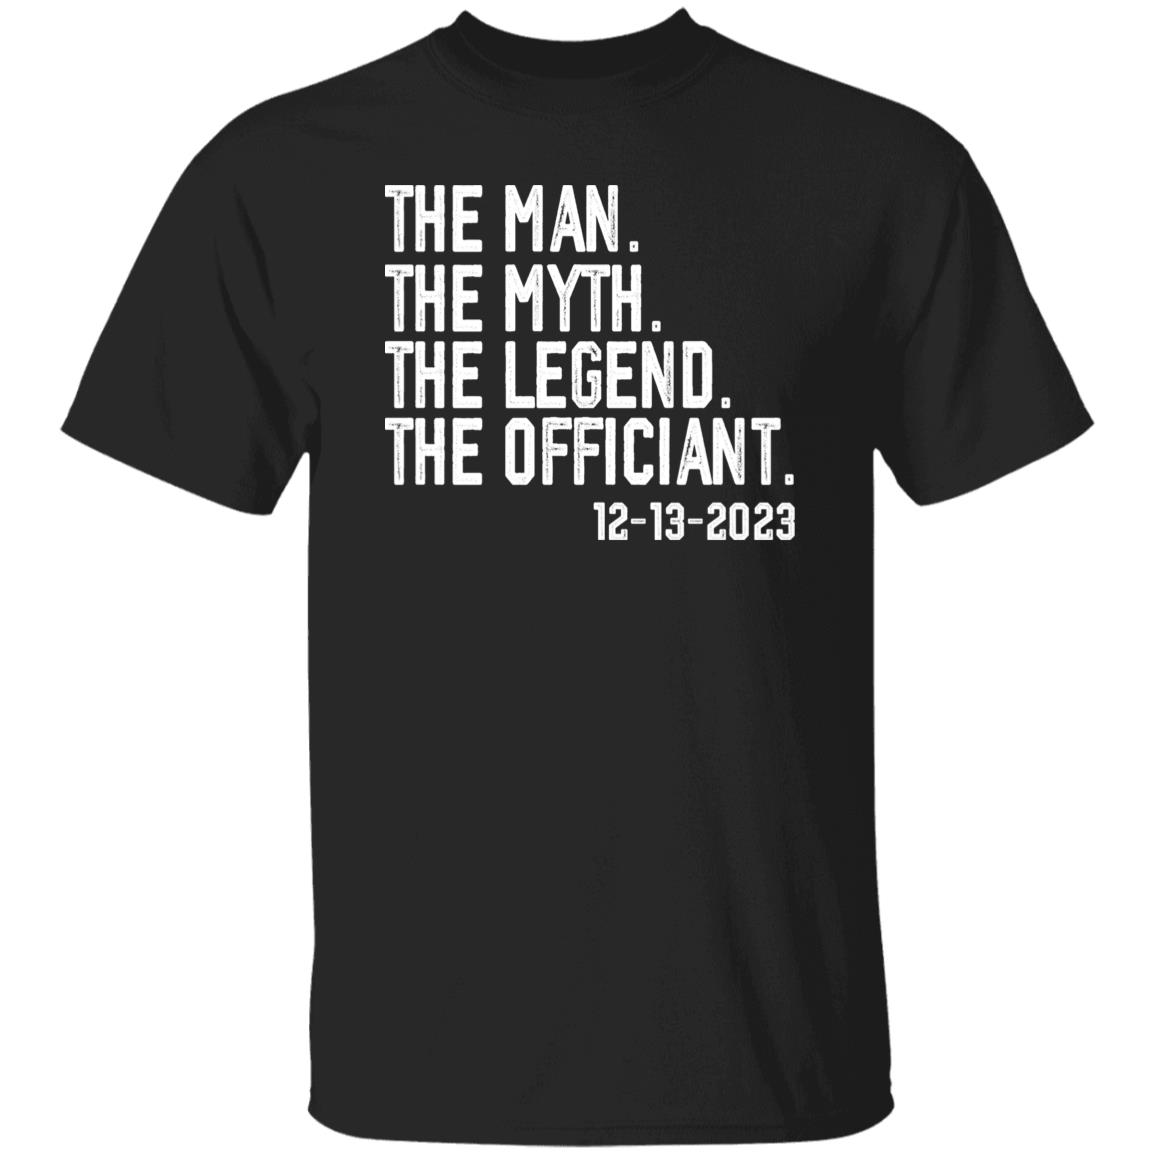 Personalized Wedding Gift Shirt for Officiant The Man Myth Legend